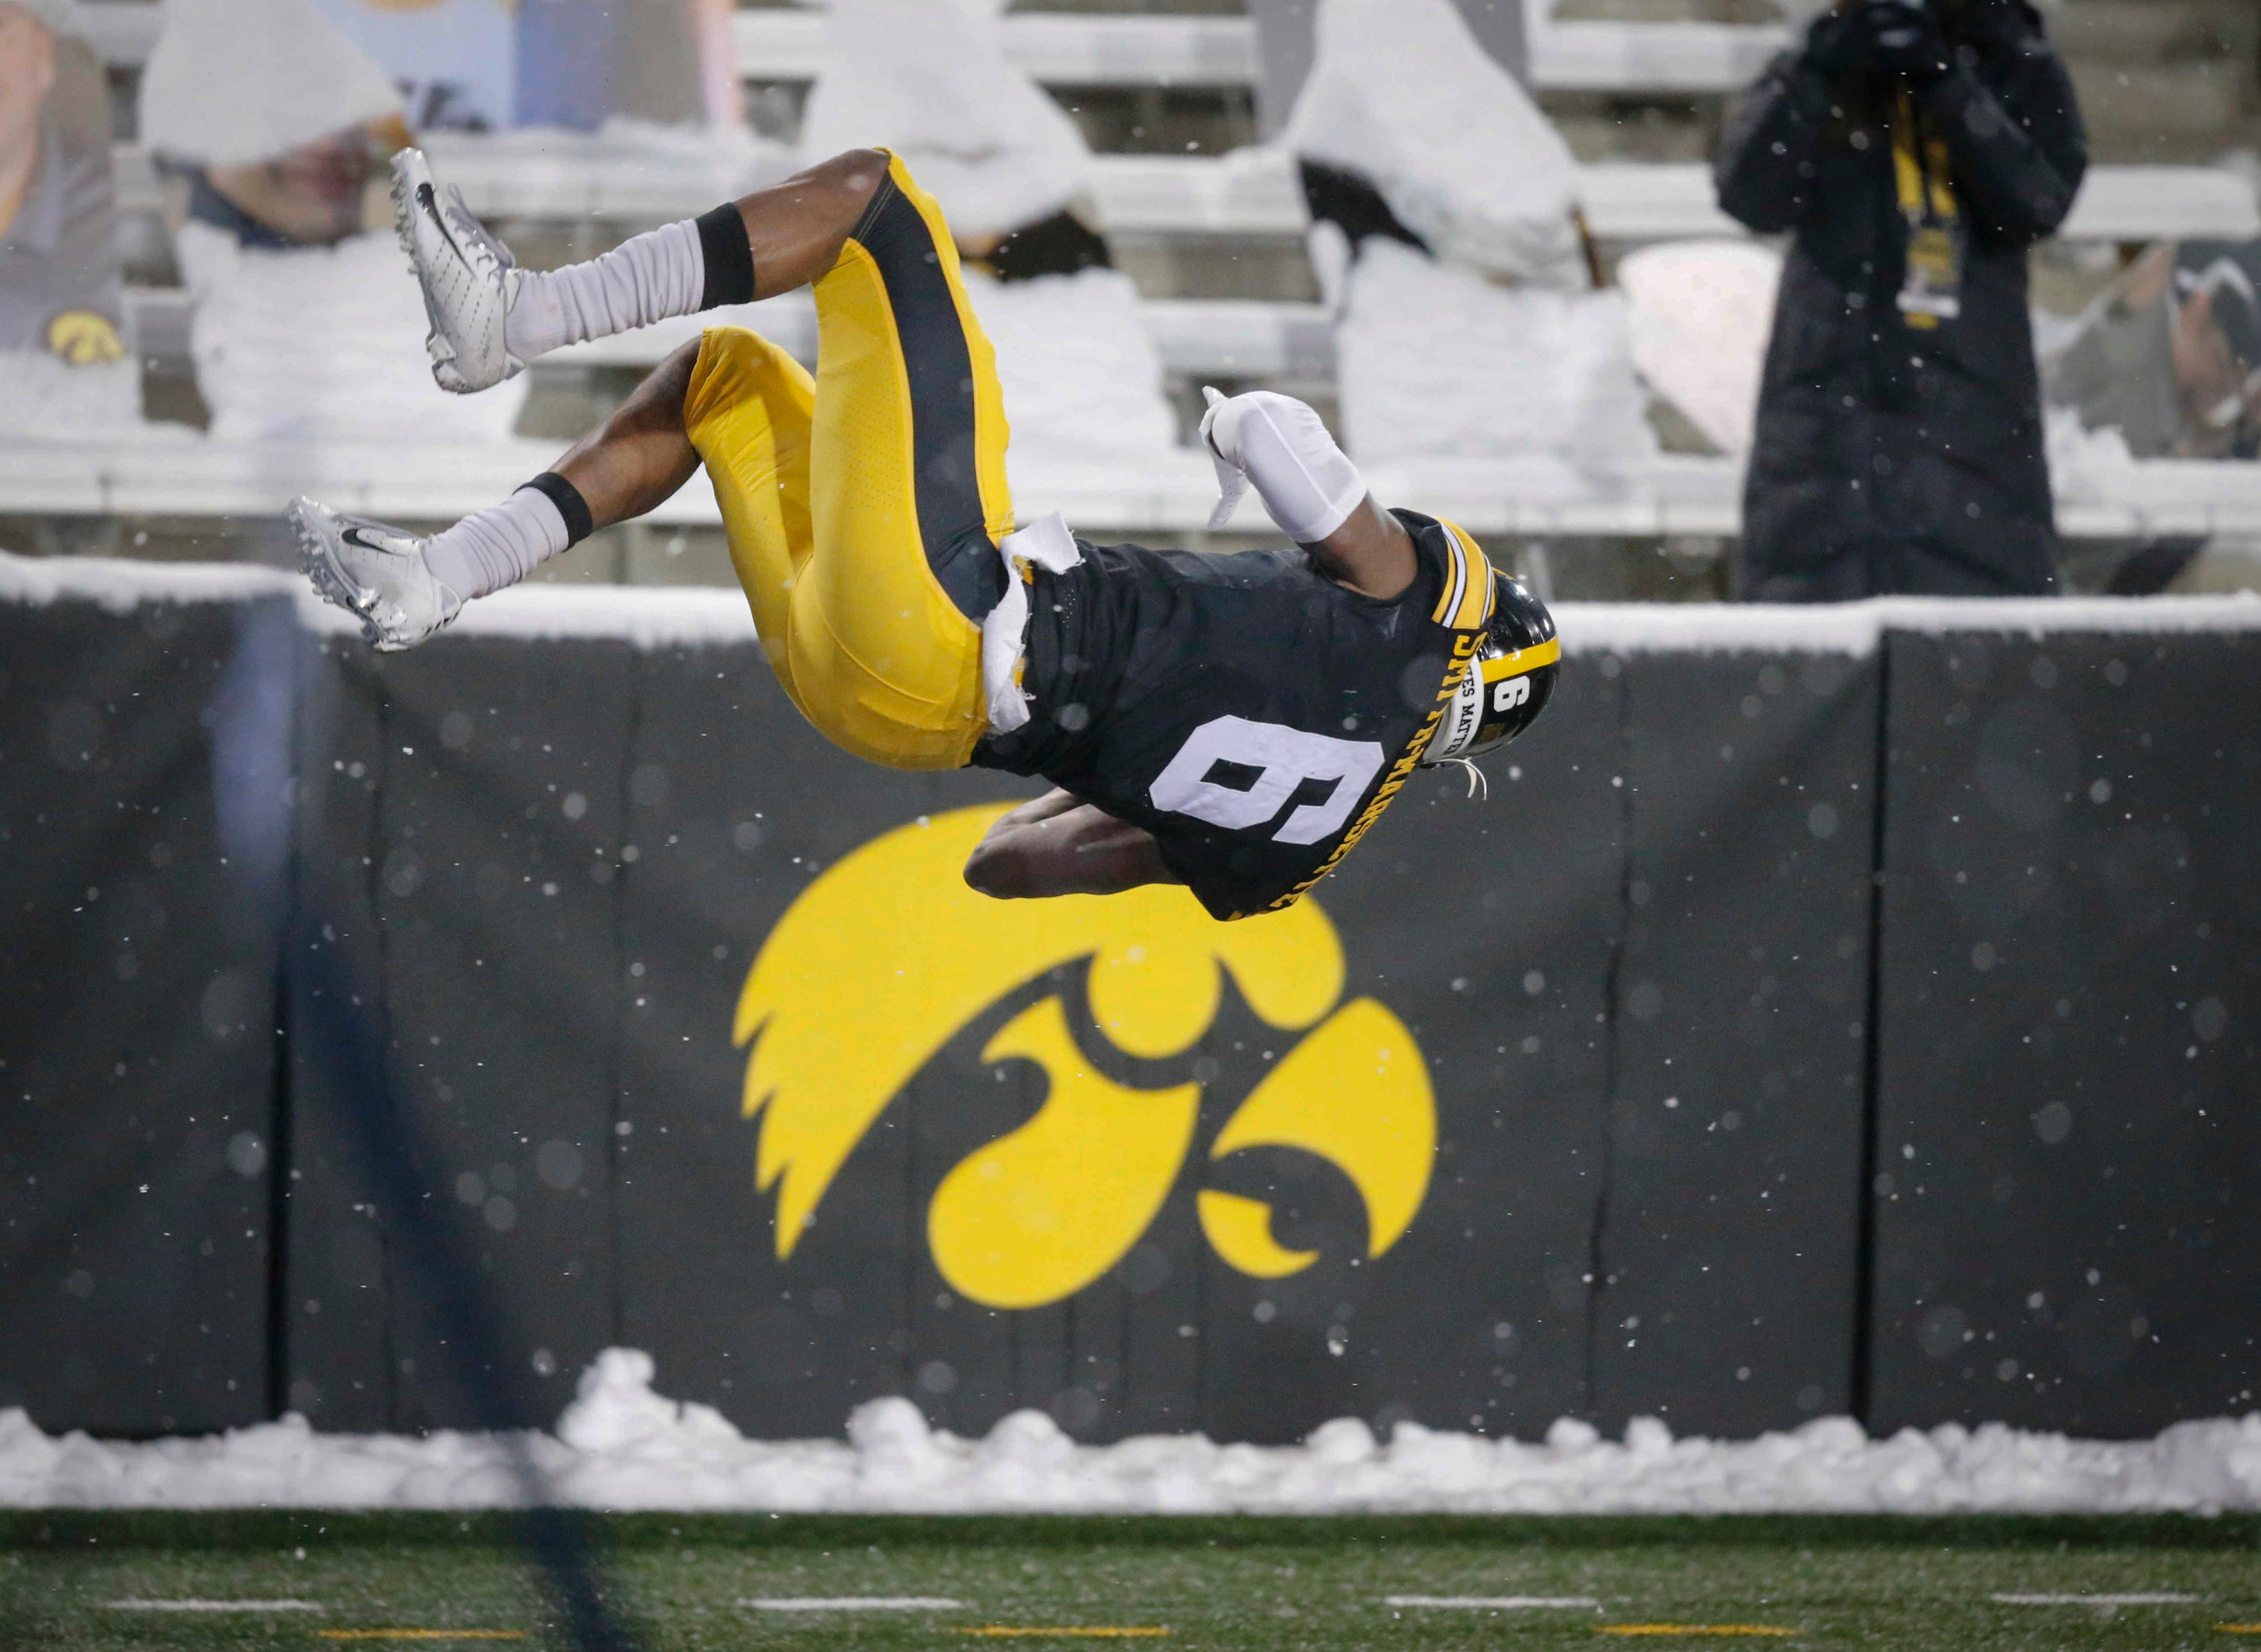 Iowa senior receiver Ihmir Smith-Marsette performs a flip after pulling down a touchdown reception in the third quarter against Wisconsin on Saturday, Dec. 12, 2020, at Kinnick Stadium in Iowa City, Iowa.